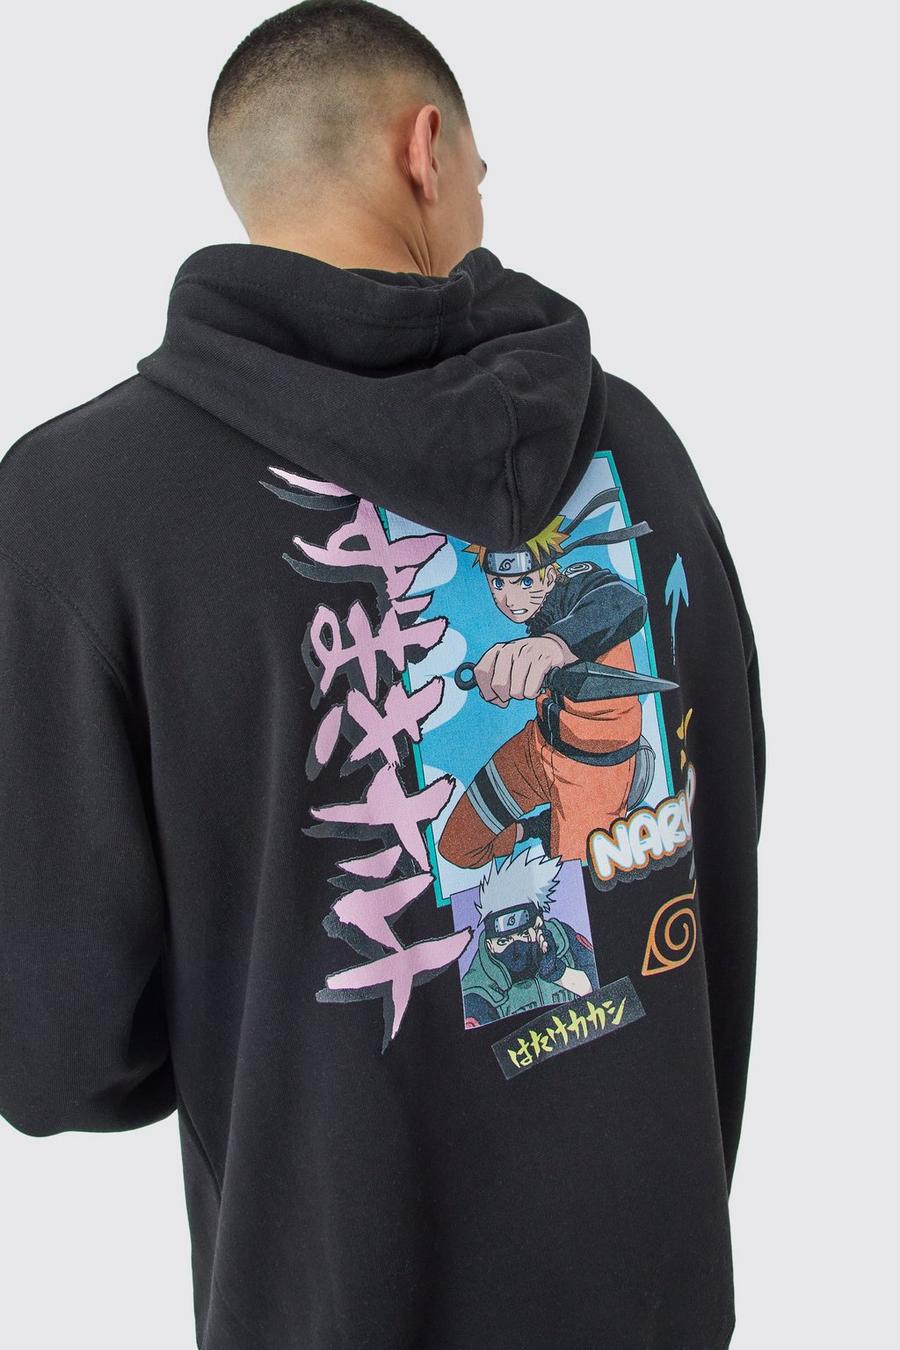 Black Naruto Anime Oversize hoodie med tryck image number 1